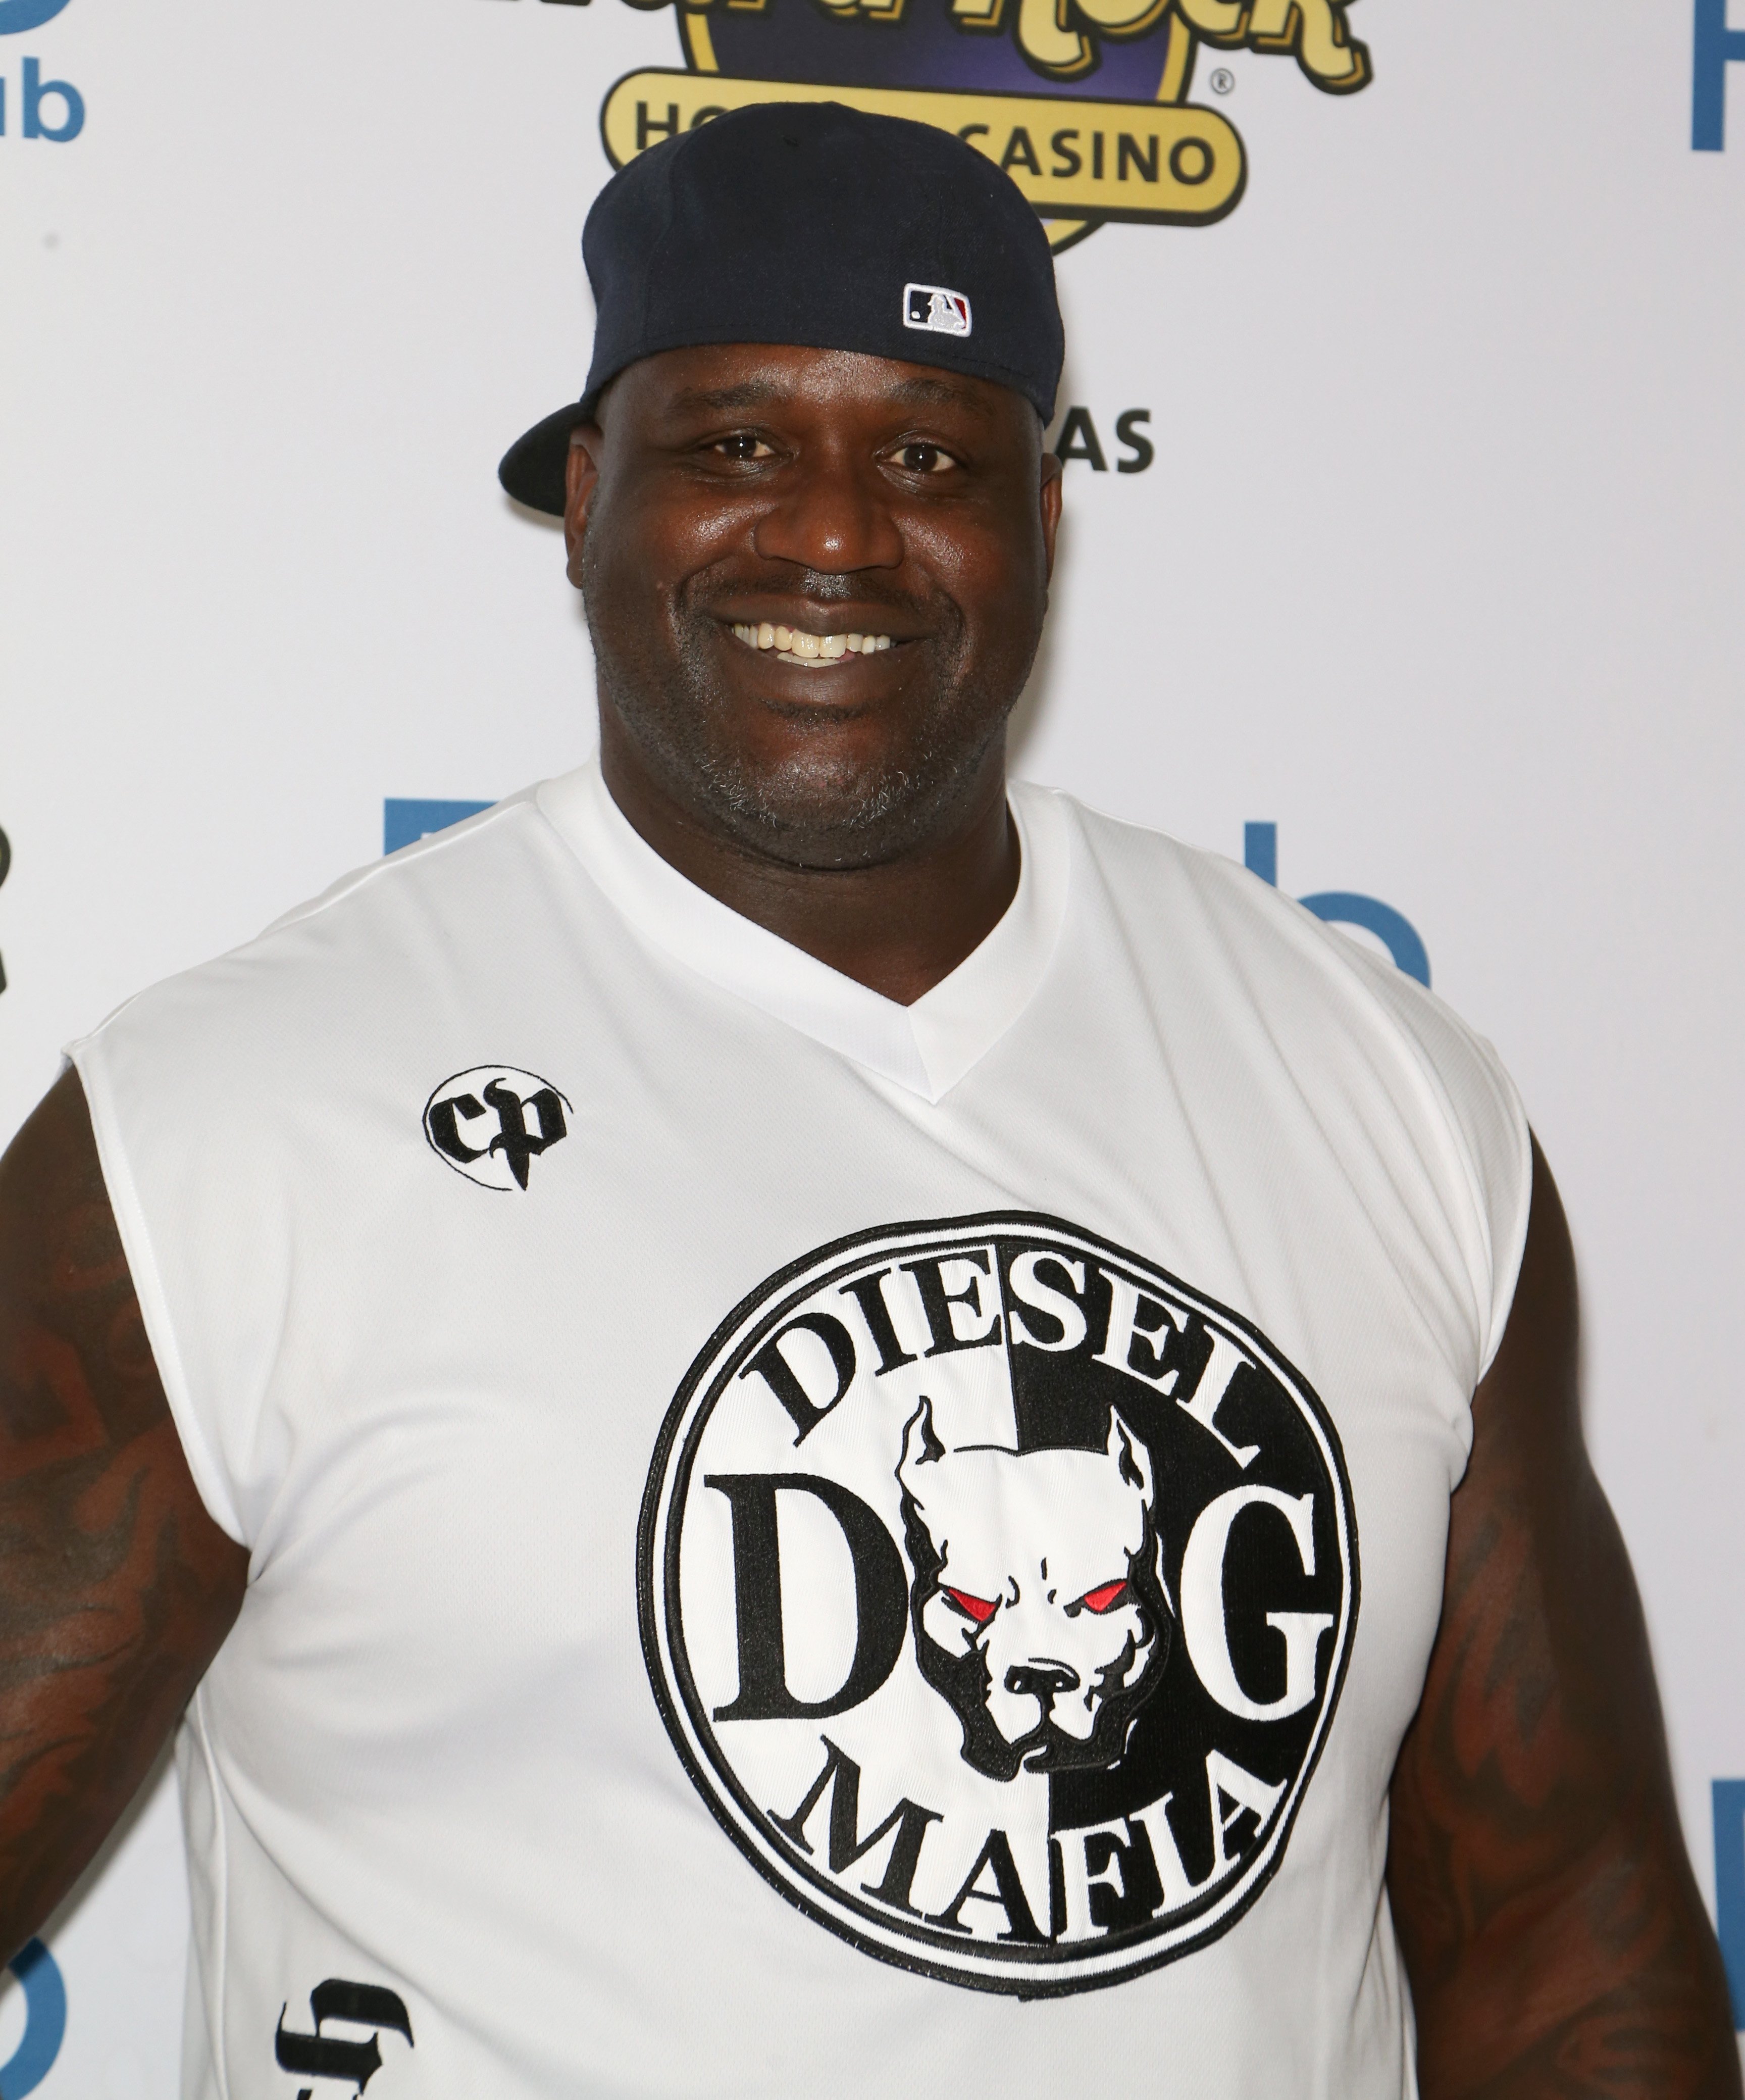 Shaquille O'Neal aka DJ Diesel at the Rehab Beach Club pool party in Las Vegas, Nevada on Aug. 13, 2017 | Photo: Getty Images